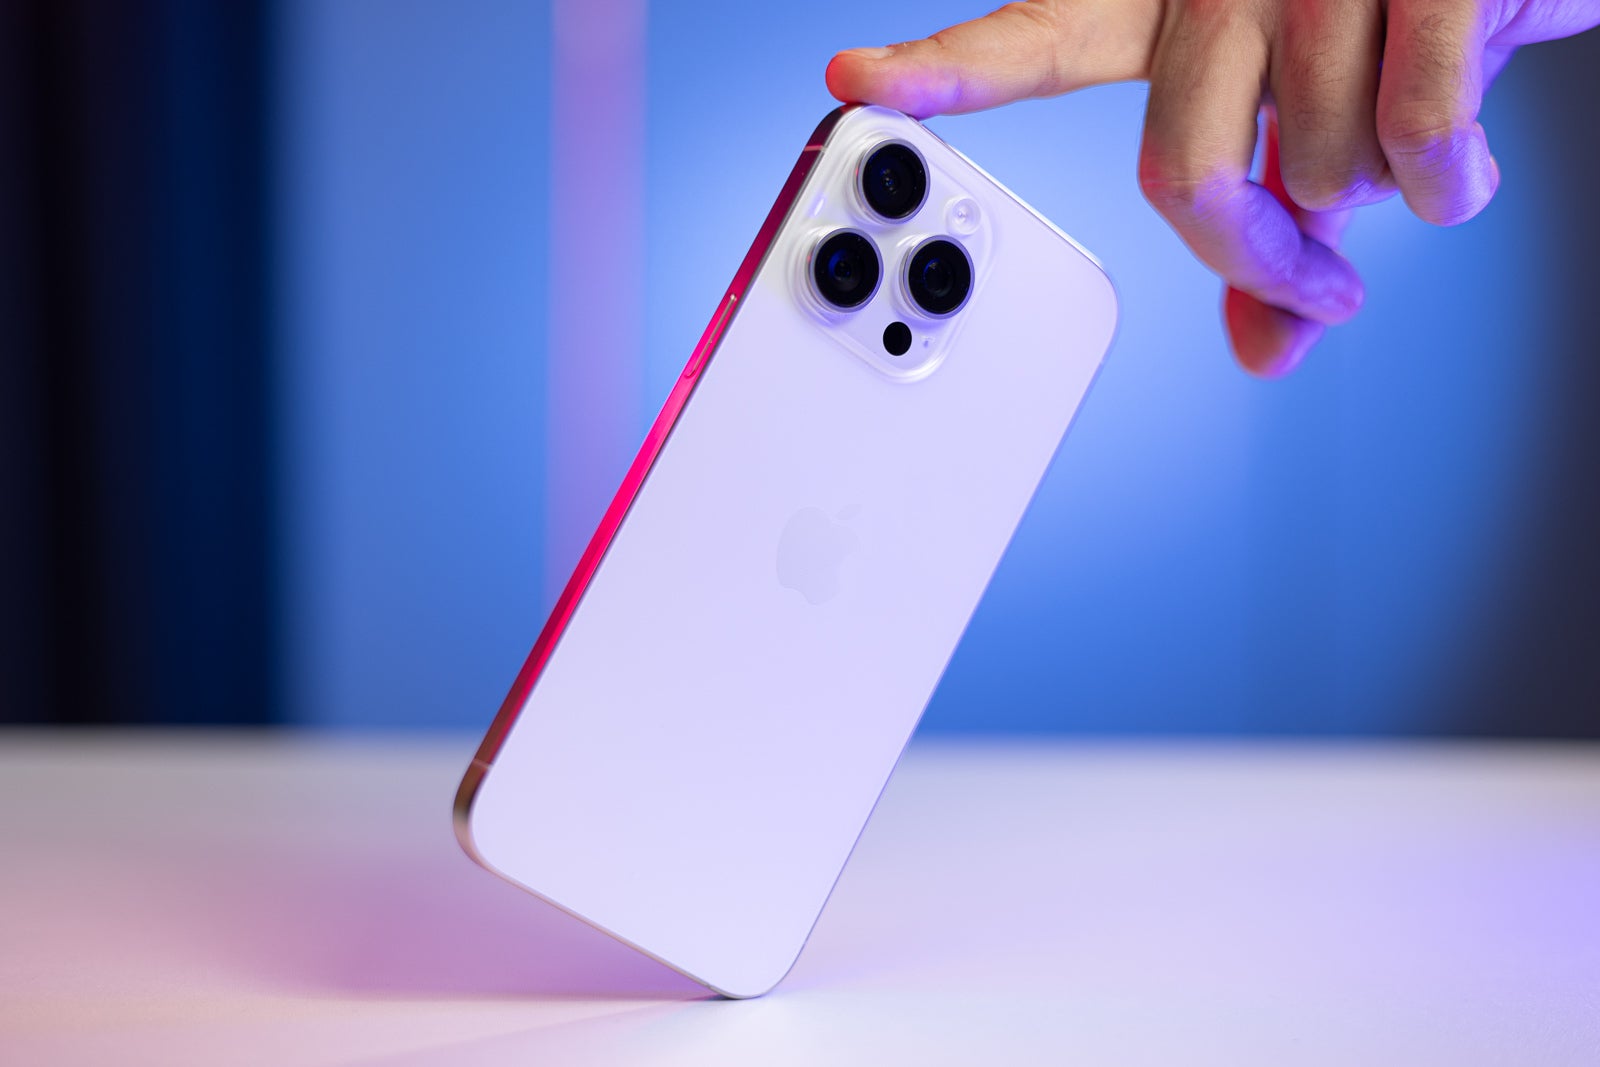 Which model of iPhone is this? - Apple probably won’t do this rumored iPhone 16 Pro camera island design: it just doesn’t fit it